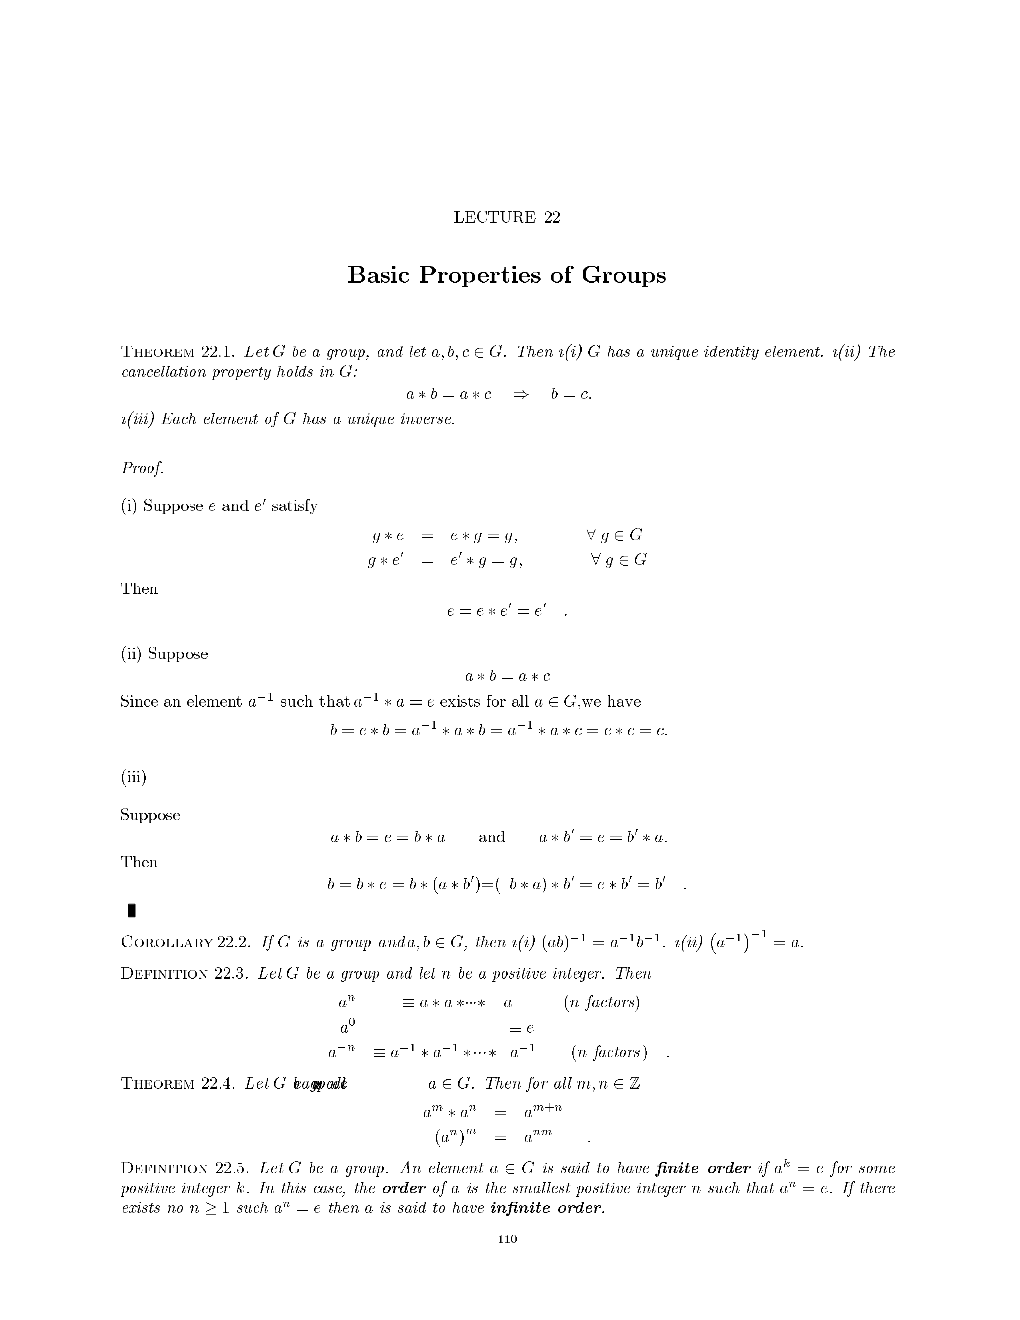 Lecture 22: Basic Properties of Groups